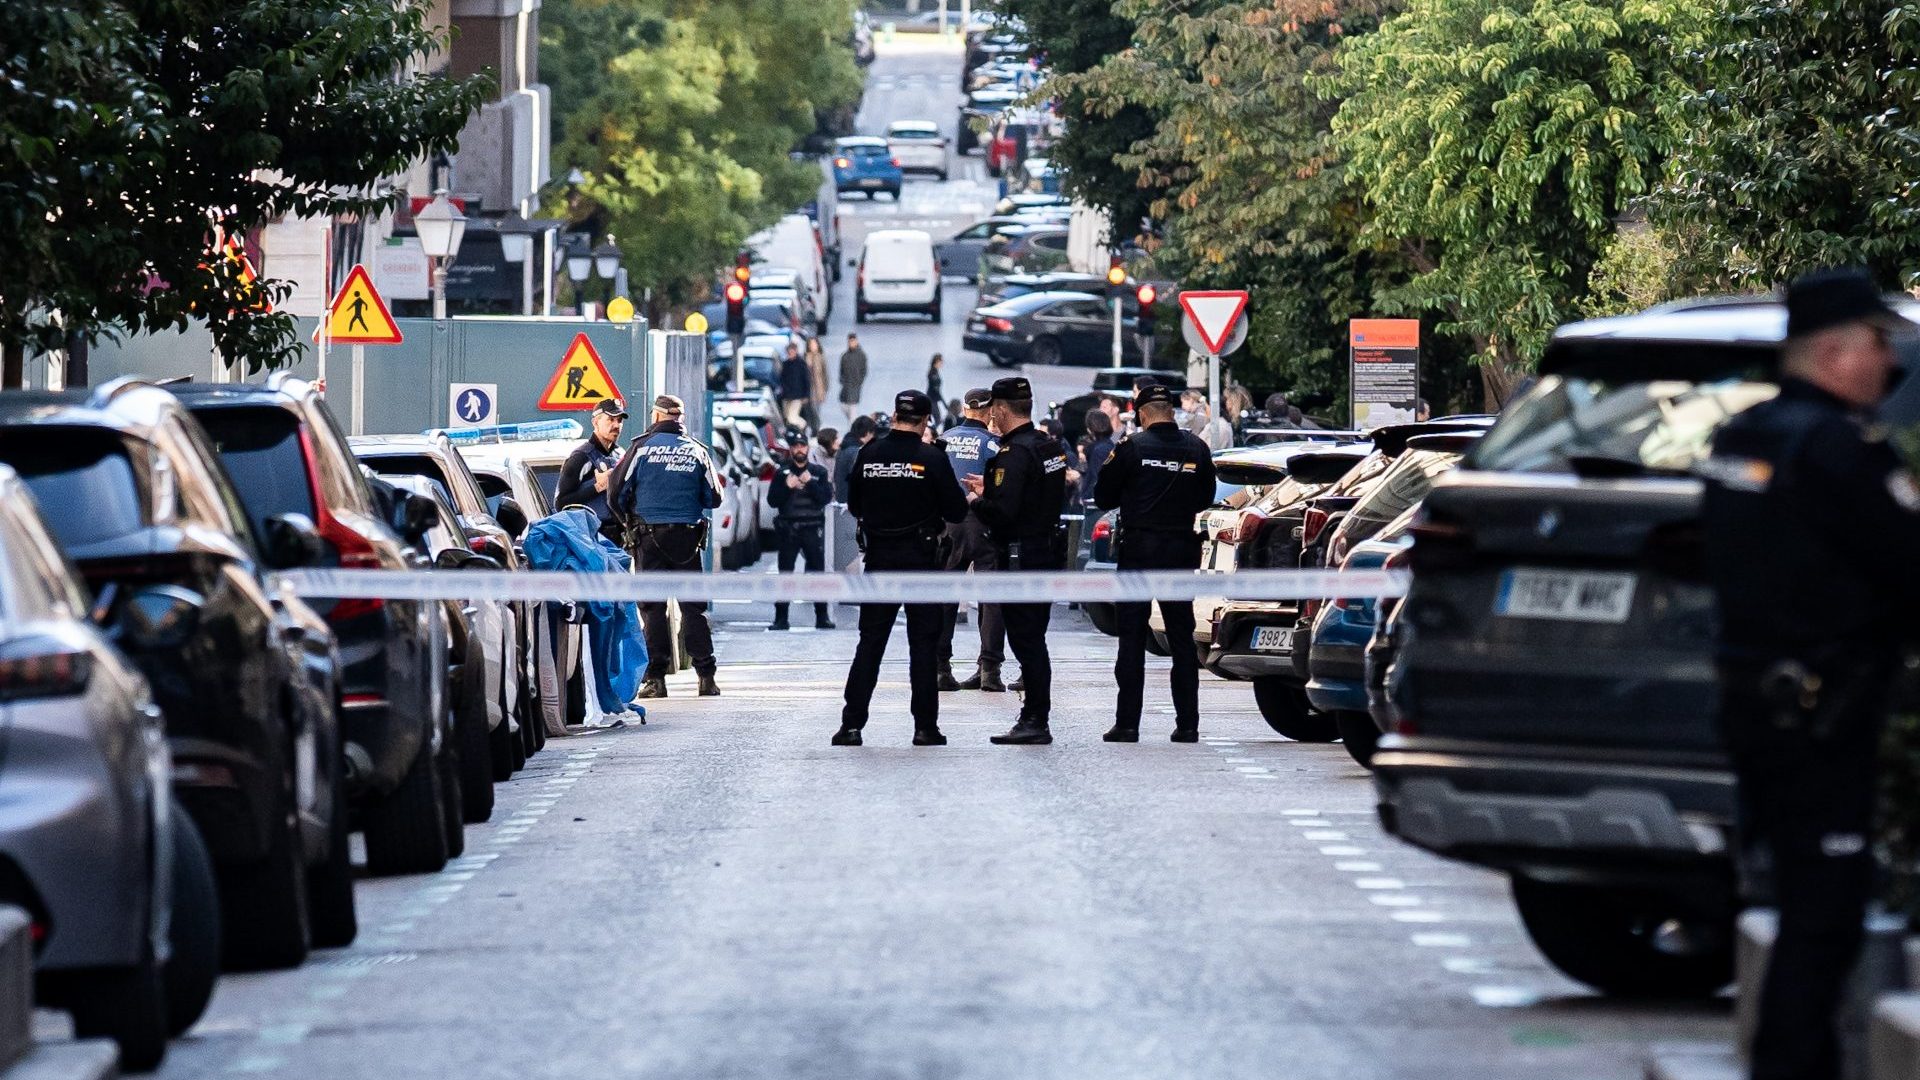 Police officers in Madrid cordon off the area where the ex-leader of the Popular Party of Catalonia and co-founder of Vox, Alejo Vidal-Quadras, was shot on November 9. Photo: Diego Radames/Europa Press/Getty